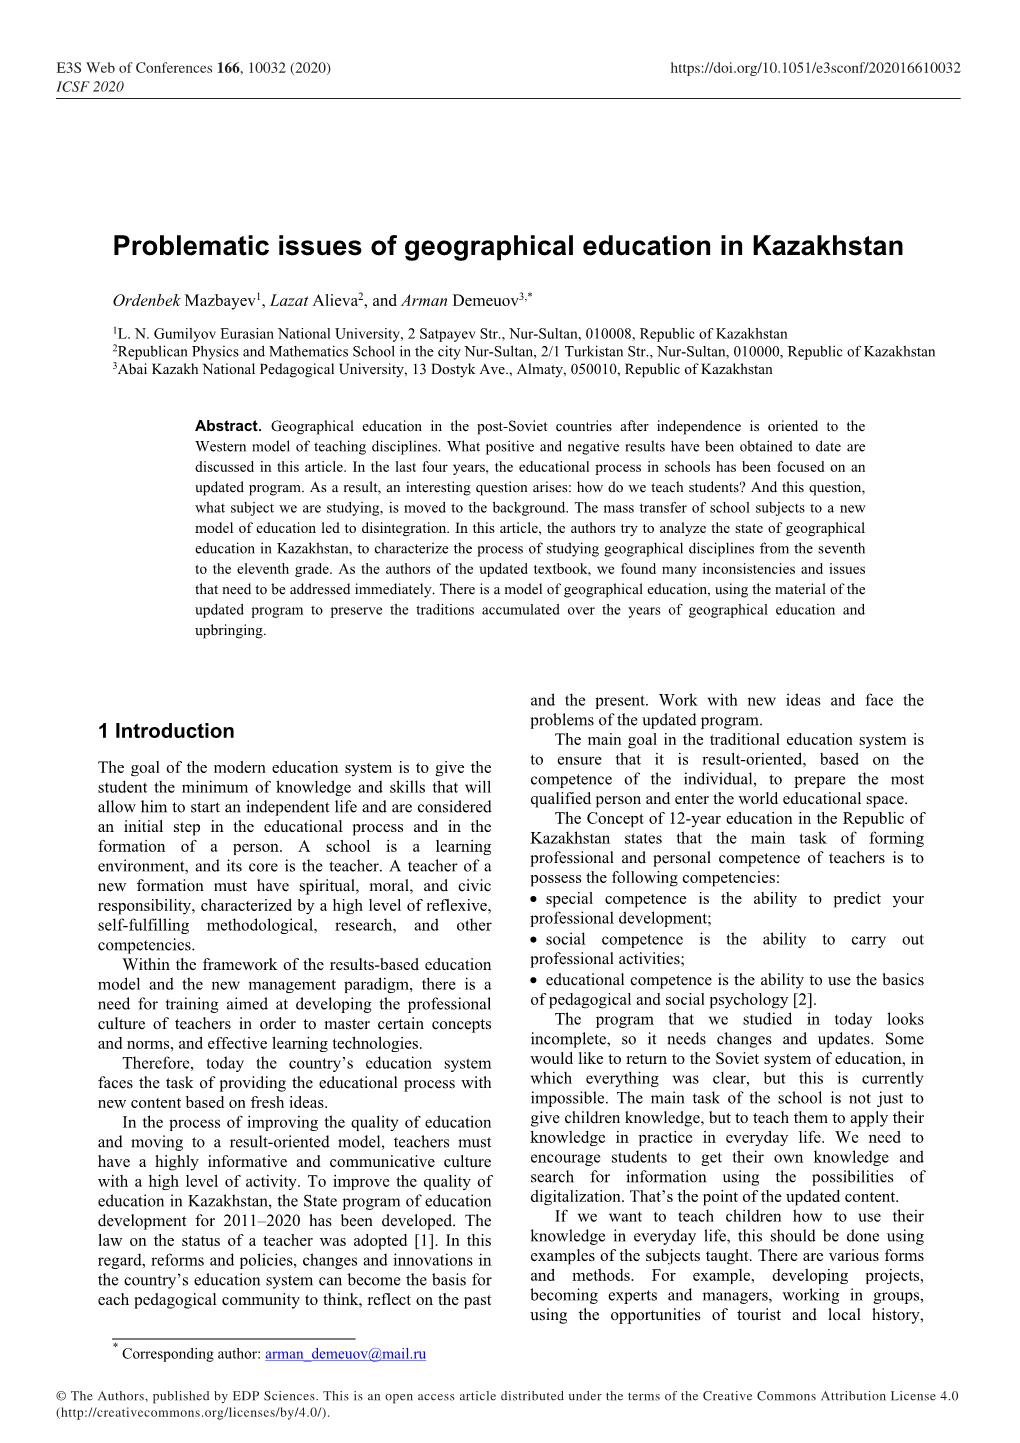 Problematic Issues of Geographical Education in Kazakhstan